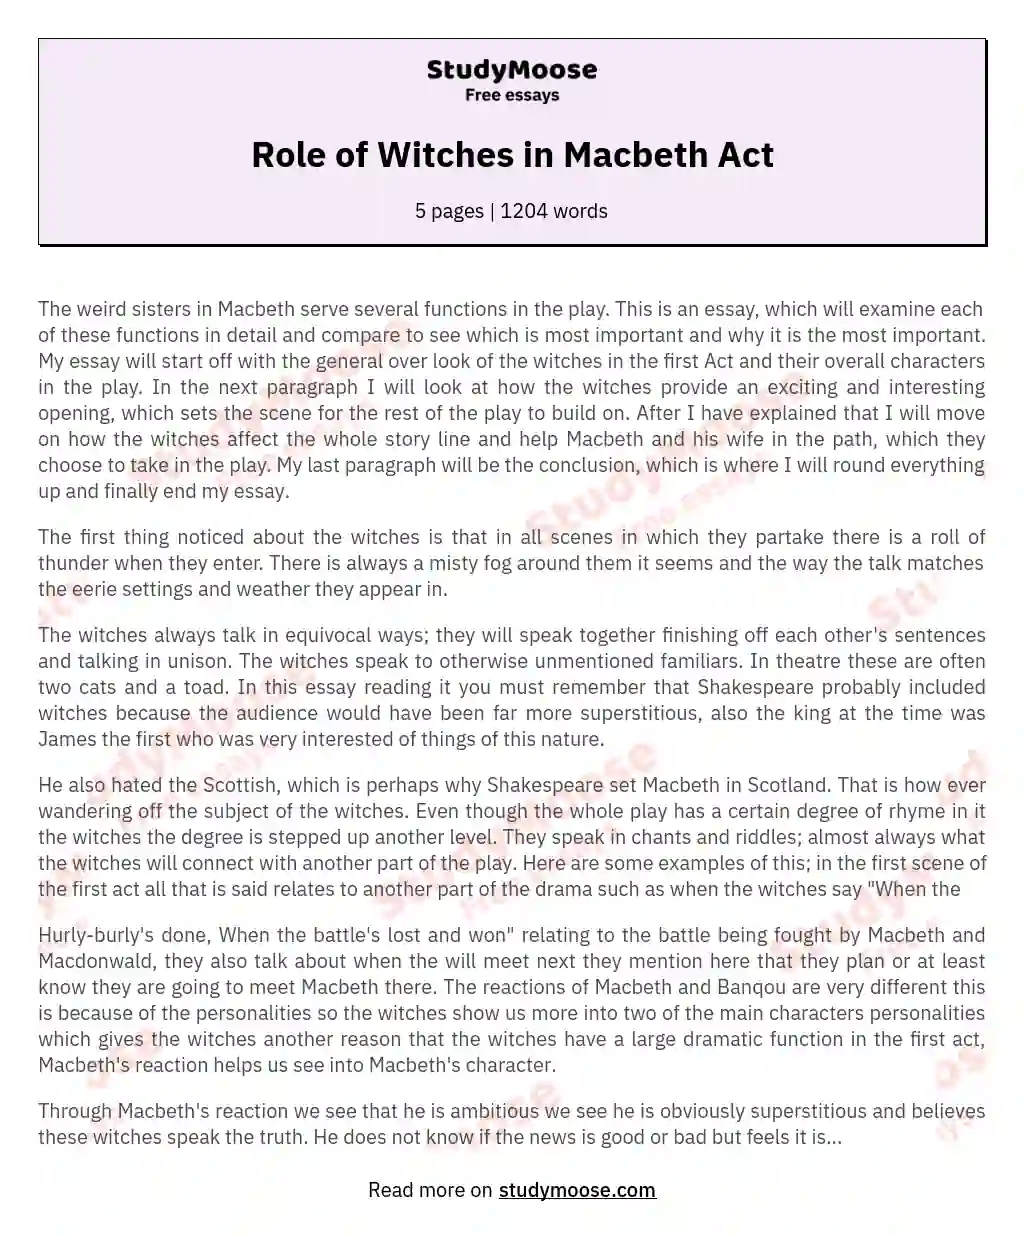 What is the dramatic function and importance of the weird sisters in Act 1 of Macbeth?